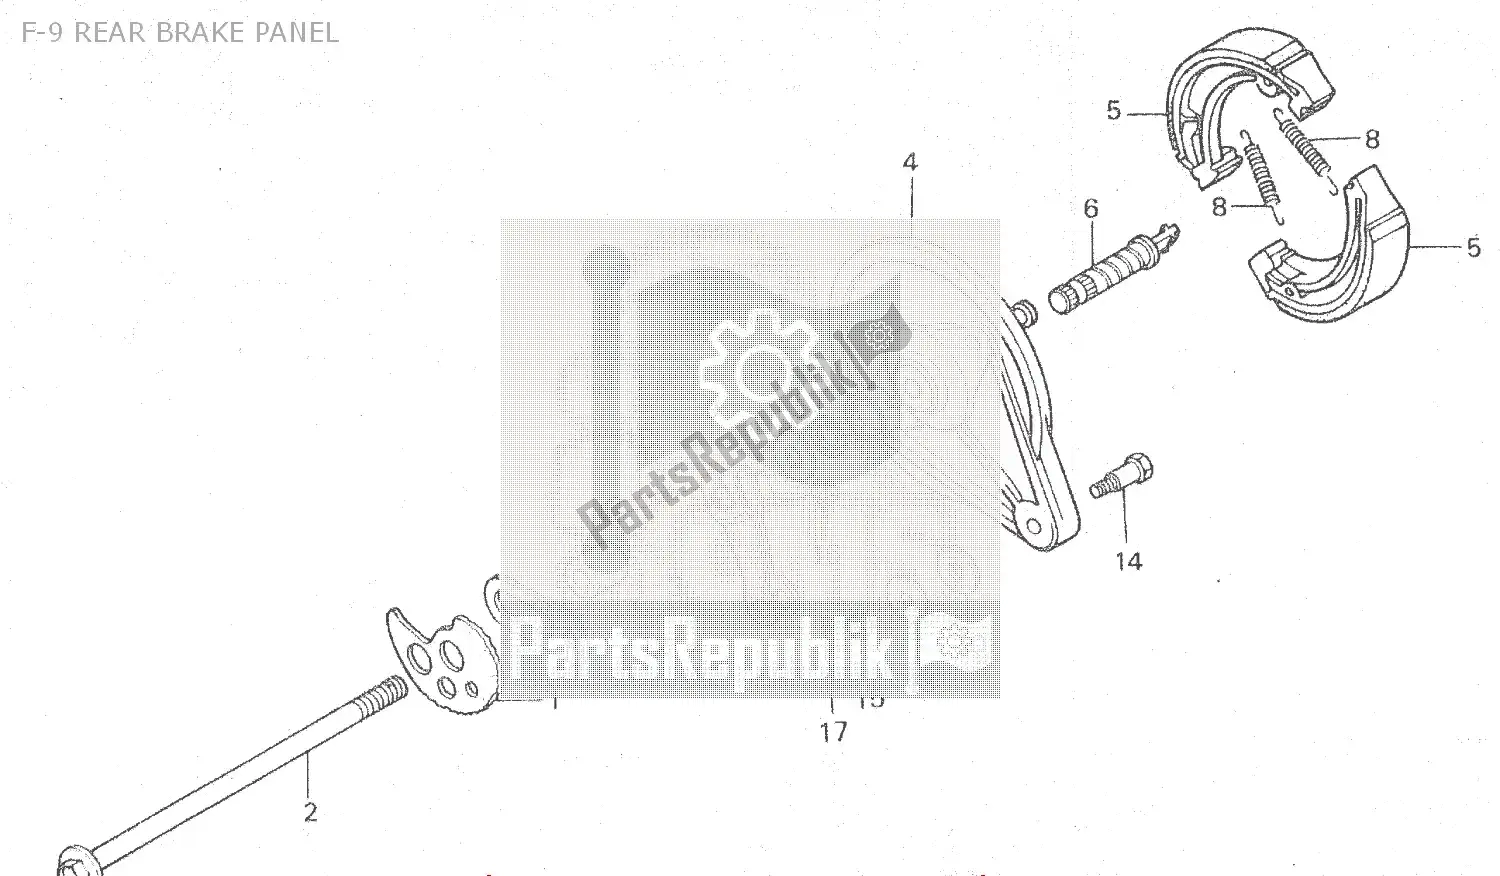 All parts for the F-9 Rear Brake Panel of the Honda MTX 80 1983